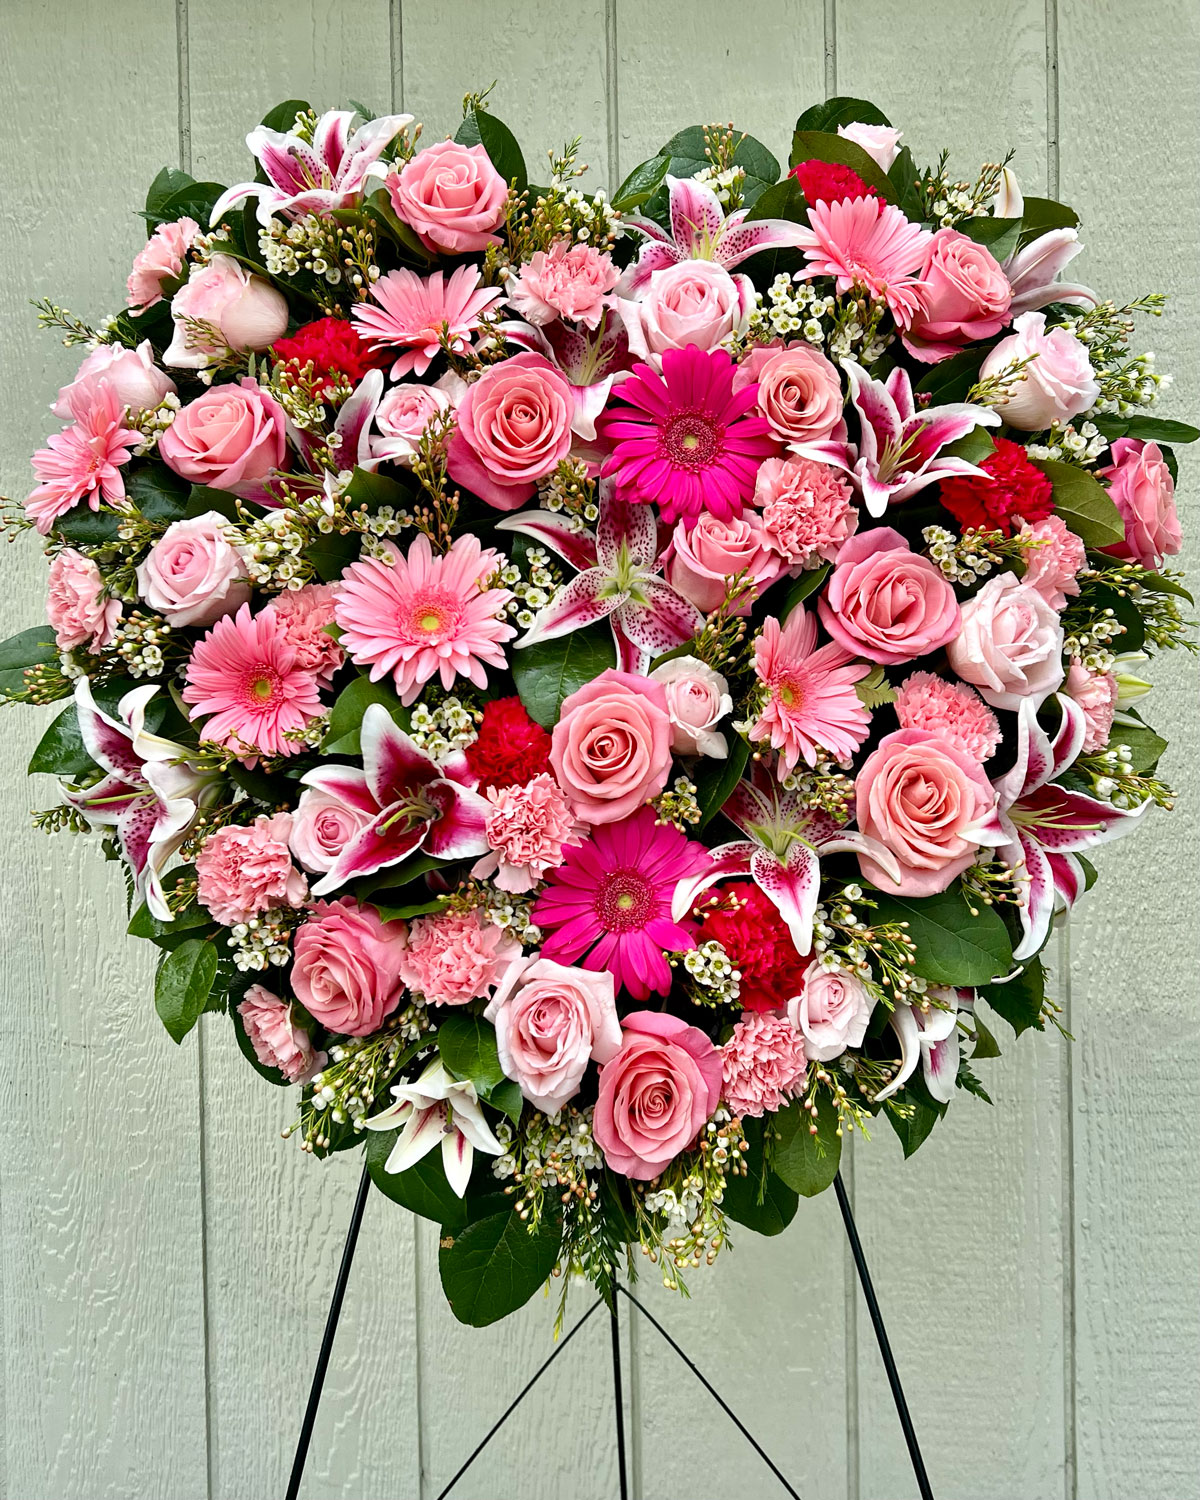 Heart Funeral Spray from Annaville Florist - Solid Pink